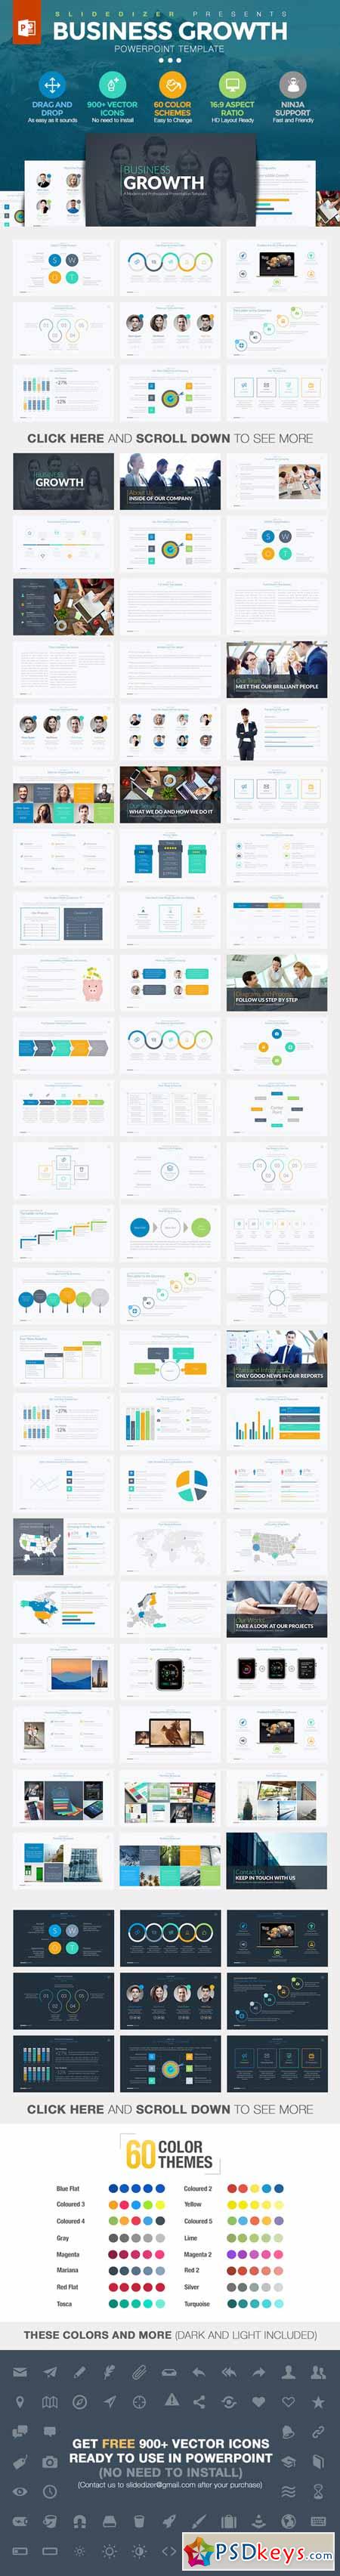 Business Growth Powerpoint Template 291976